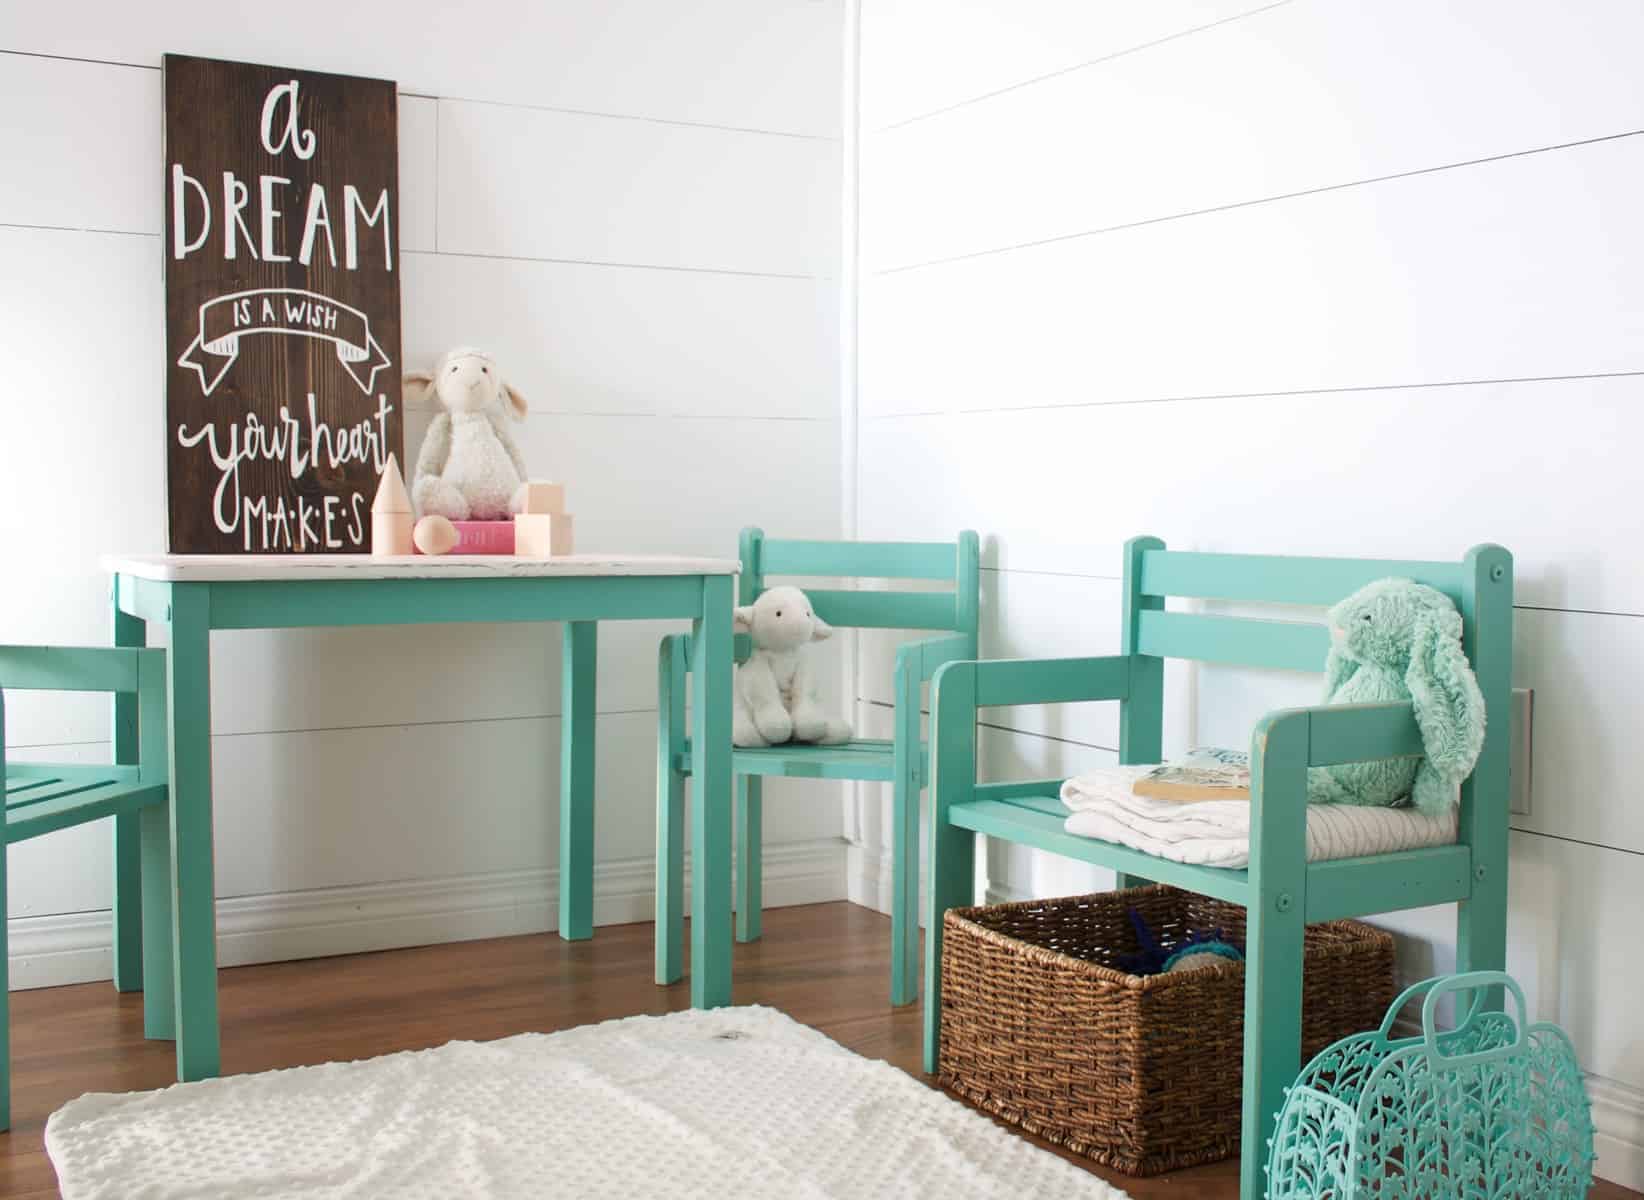 Colorful Children's Furniture #DIY #furniturepaint #paintedfurniture #chalkpaint #childrensfurniture #kidsfurniture #playroom #turquoise #teal #pink #stencil #hearts #countrychicpaint - blog.countrychicpaint.com